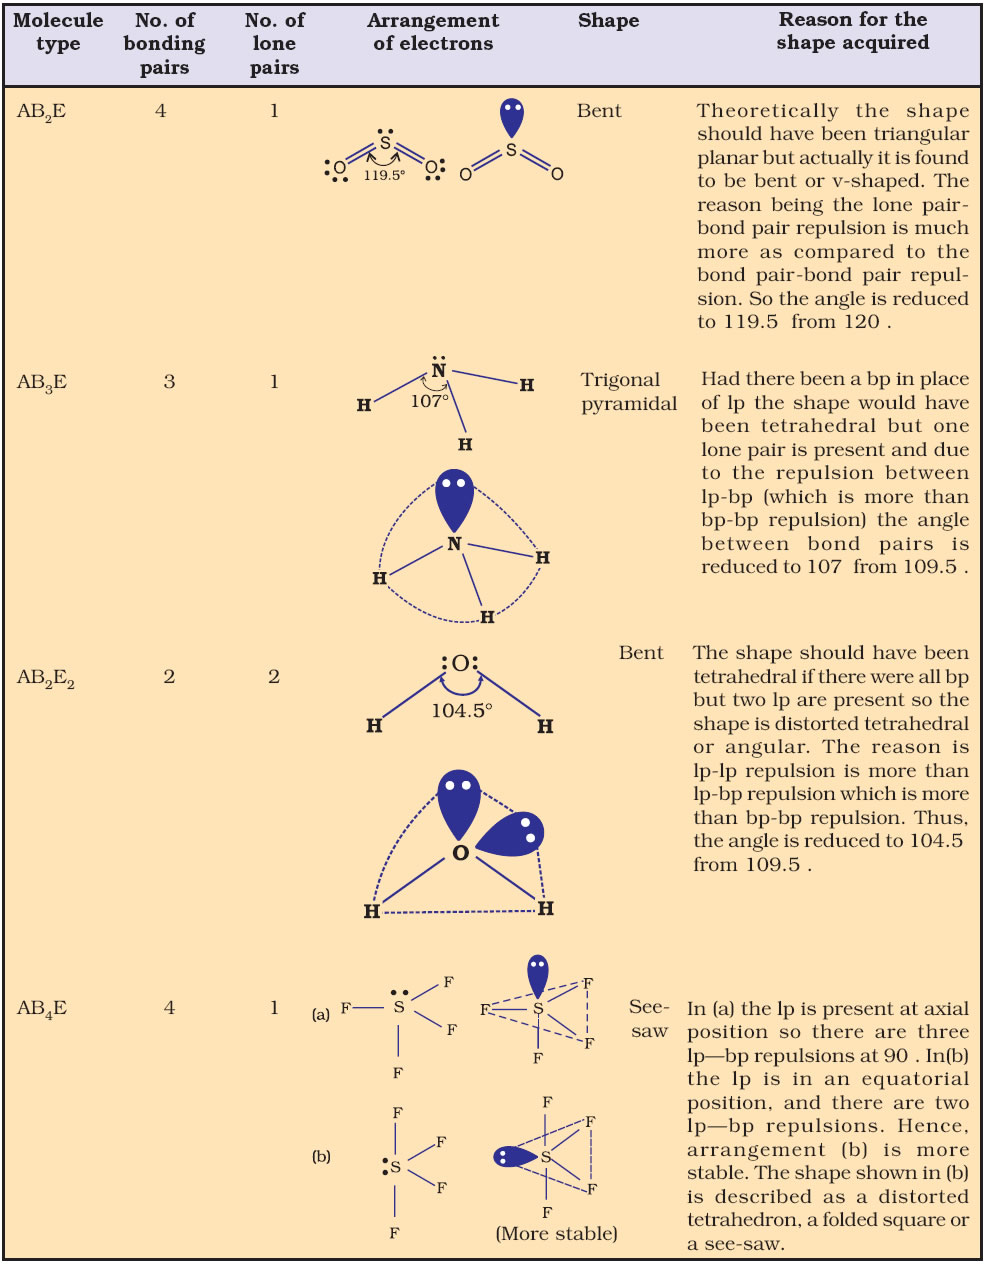 Shapes of Molecules containing Bond Pair and Lone Pair